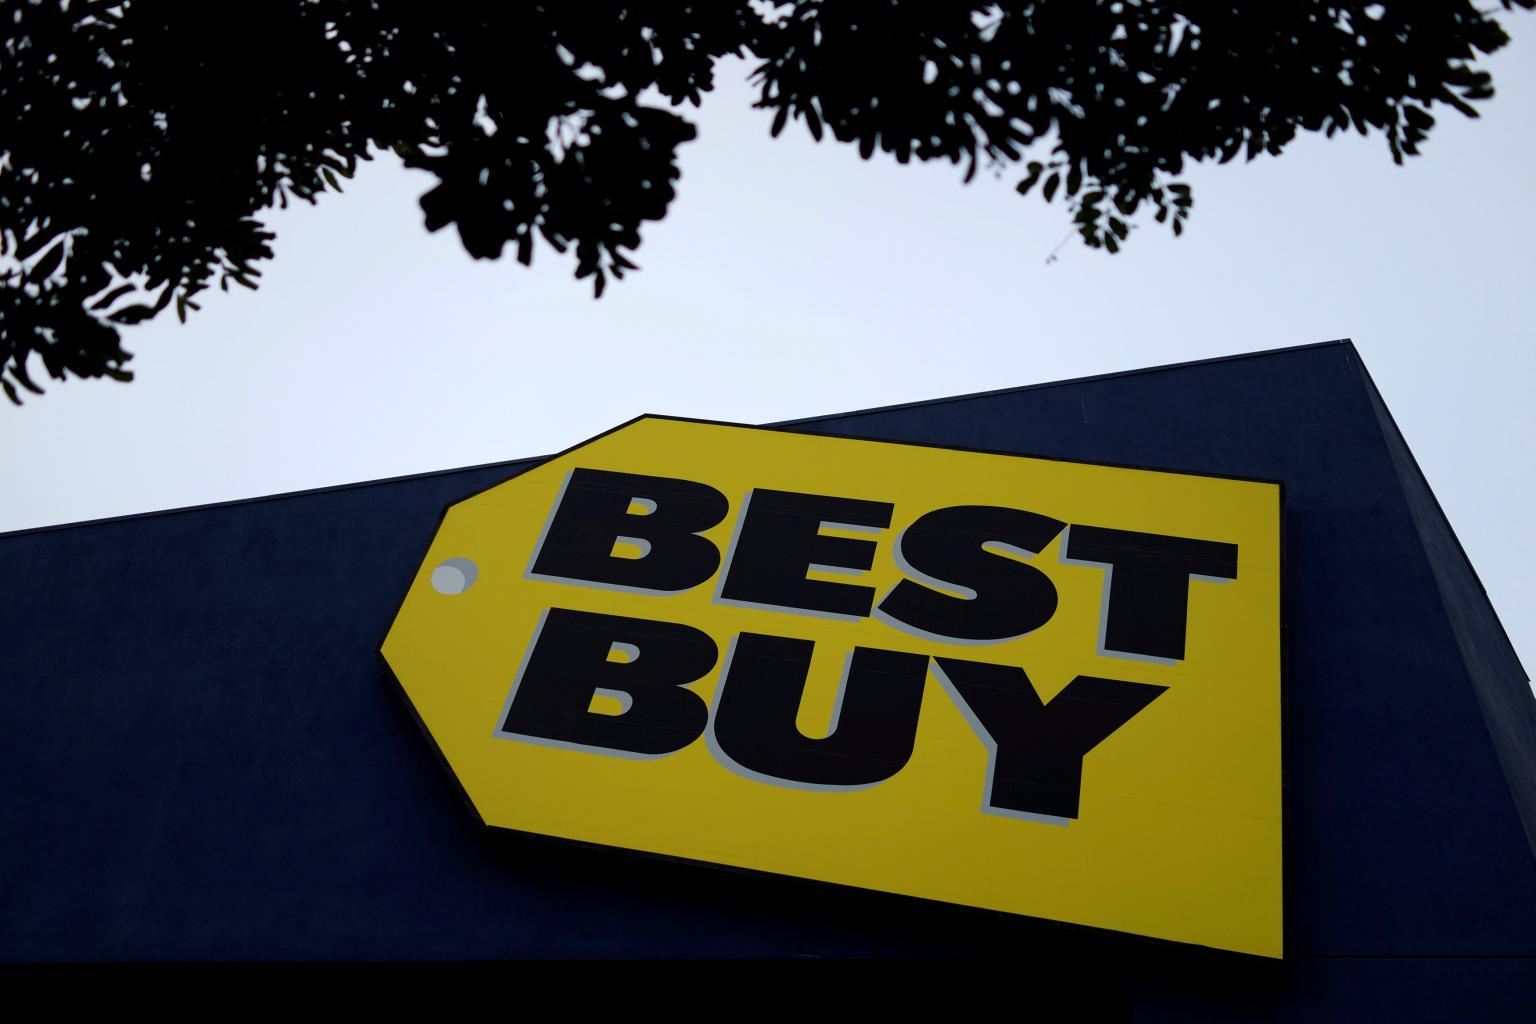 Best Buy ends relationship with China's Huawei